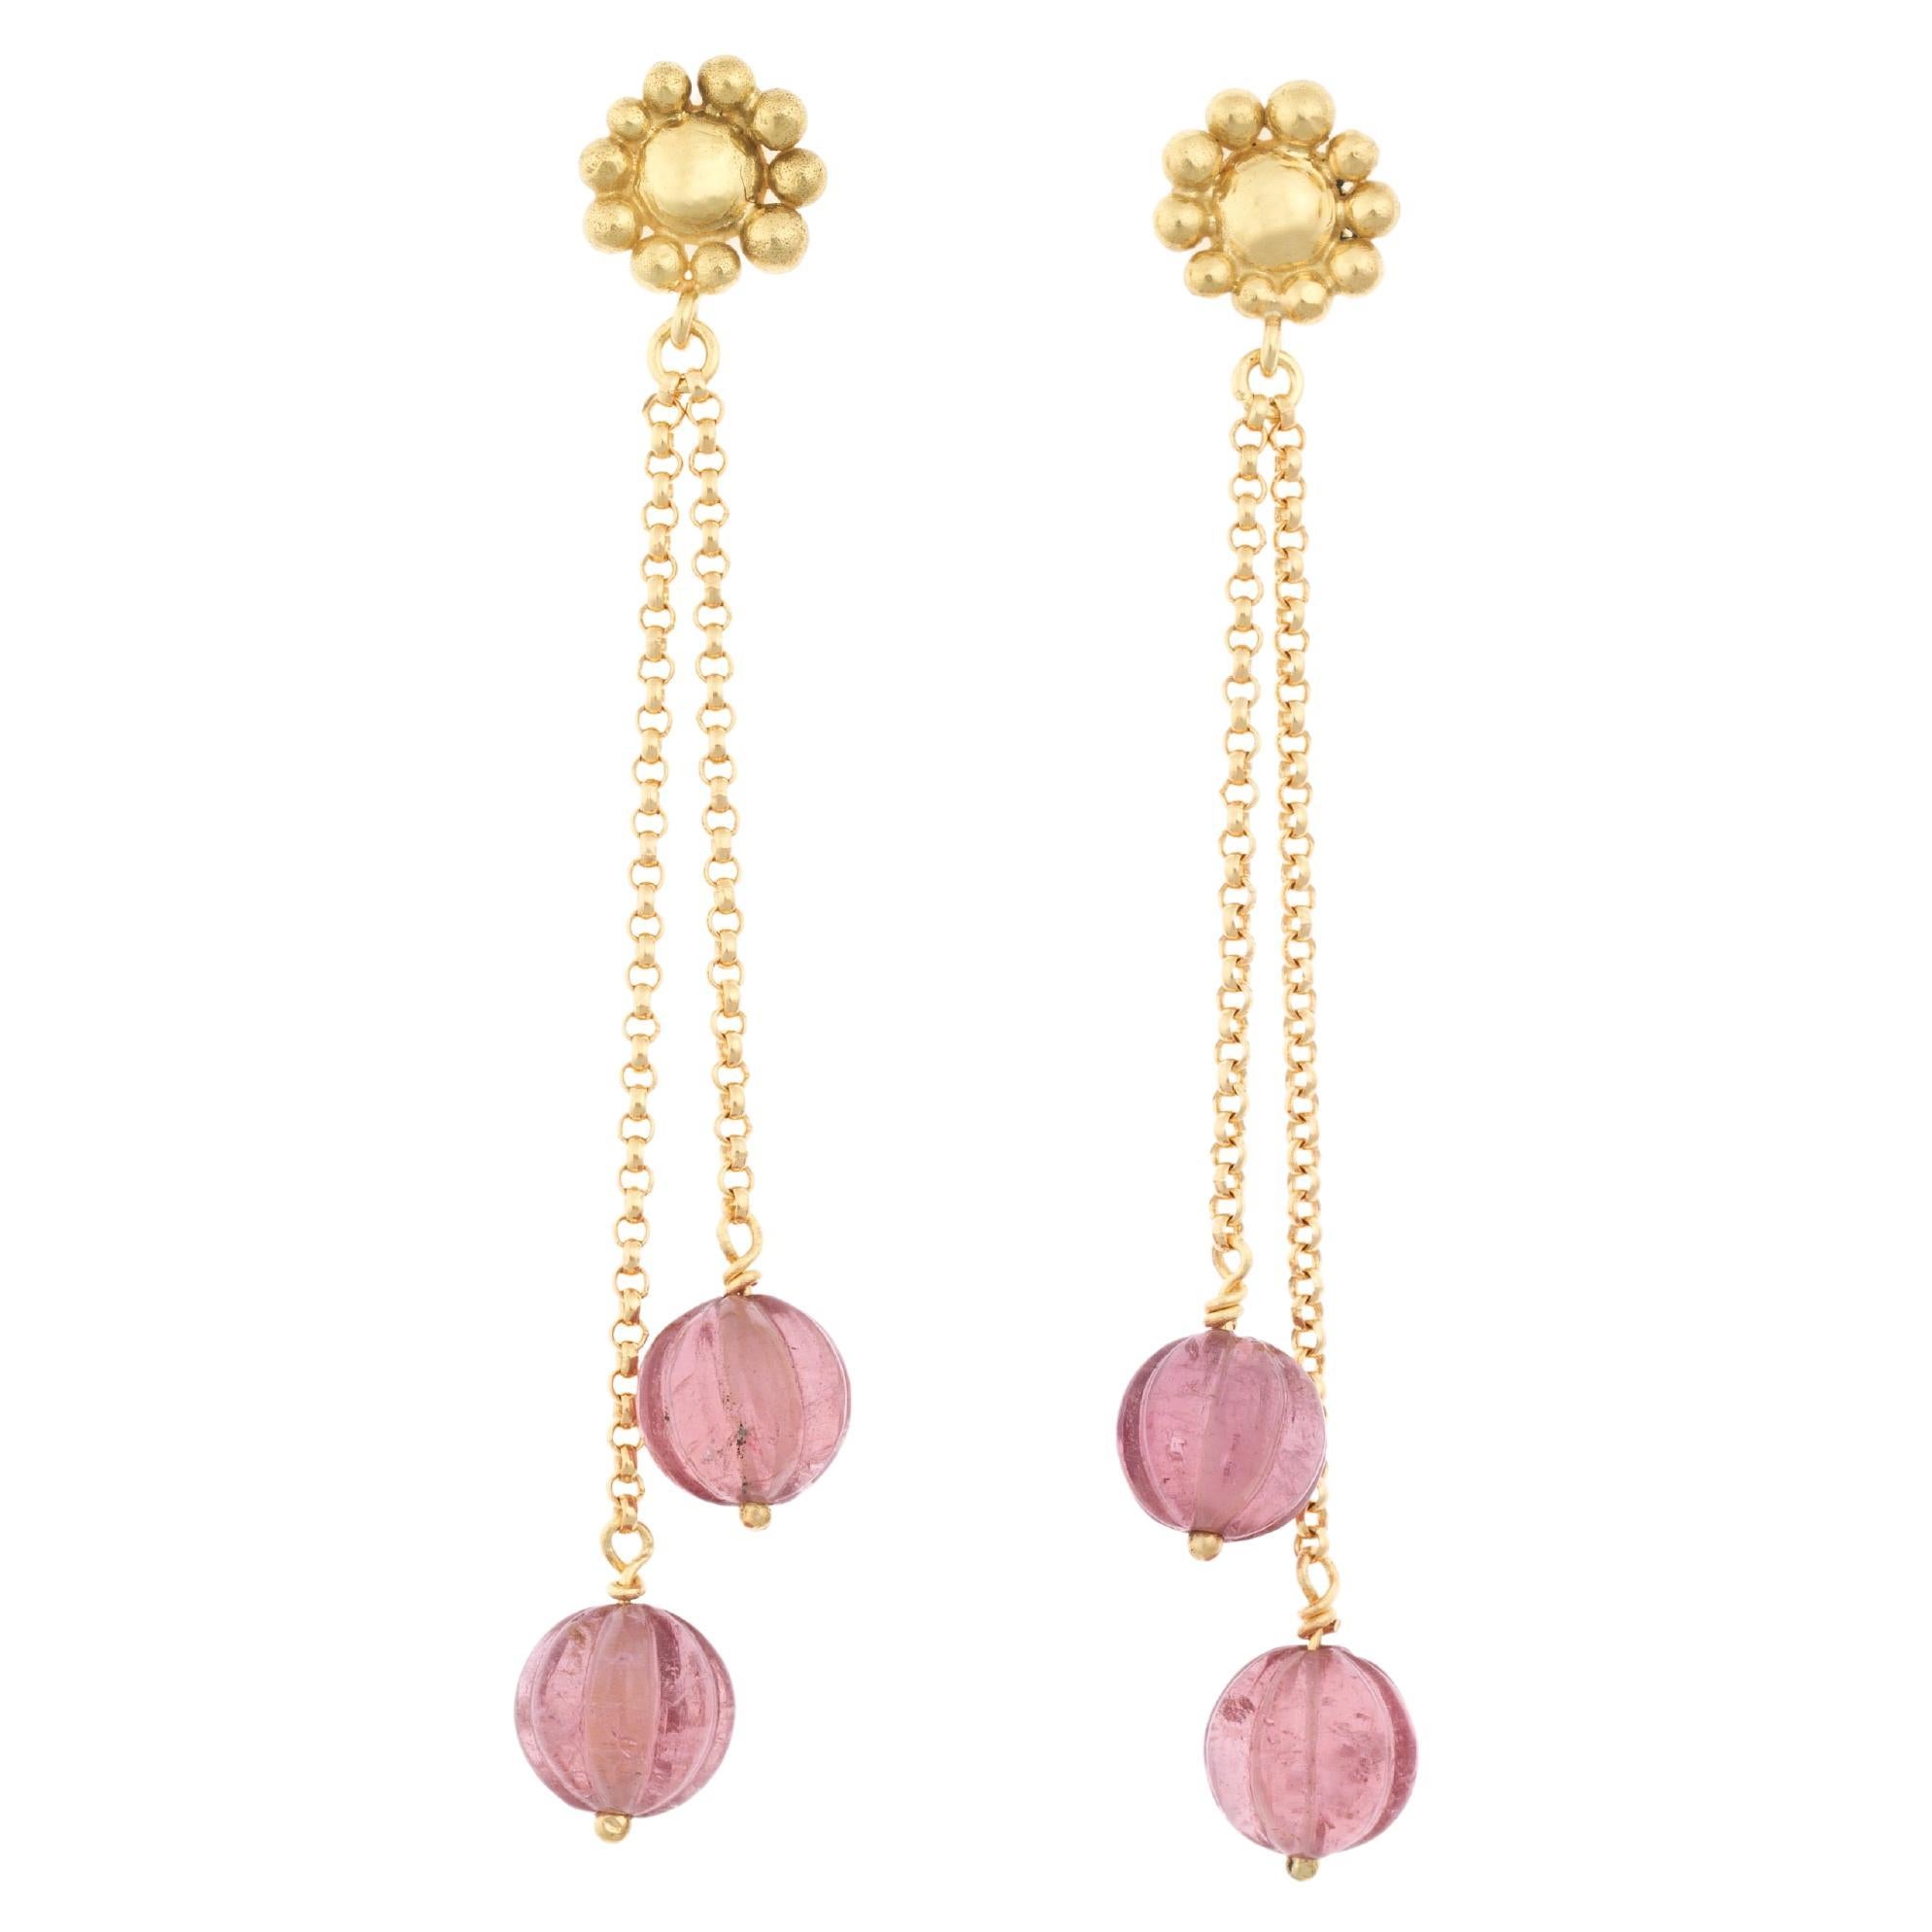 18k Gold Drop Earrings with Vivid Pink Tourmaline Beads on a Gold Chain For Sale